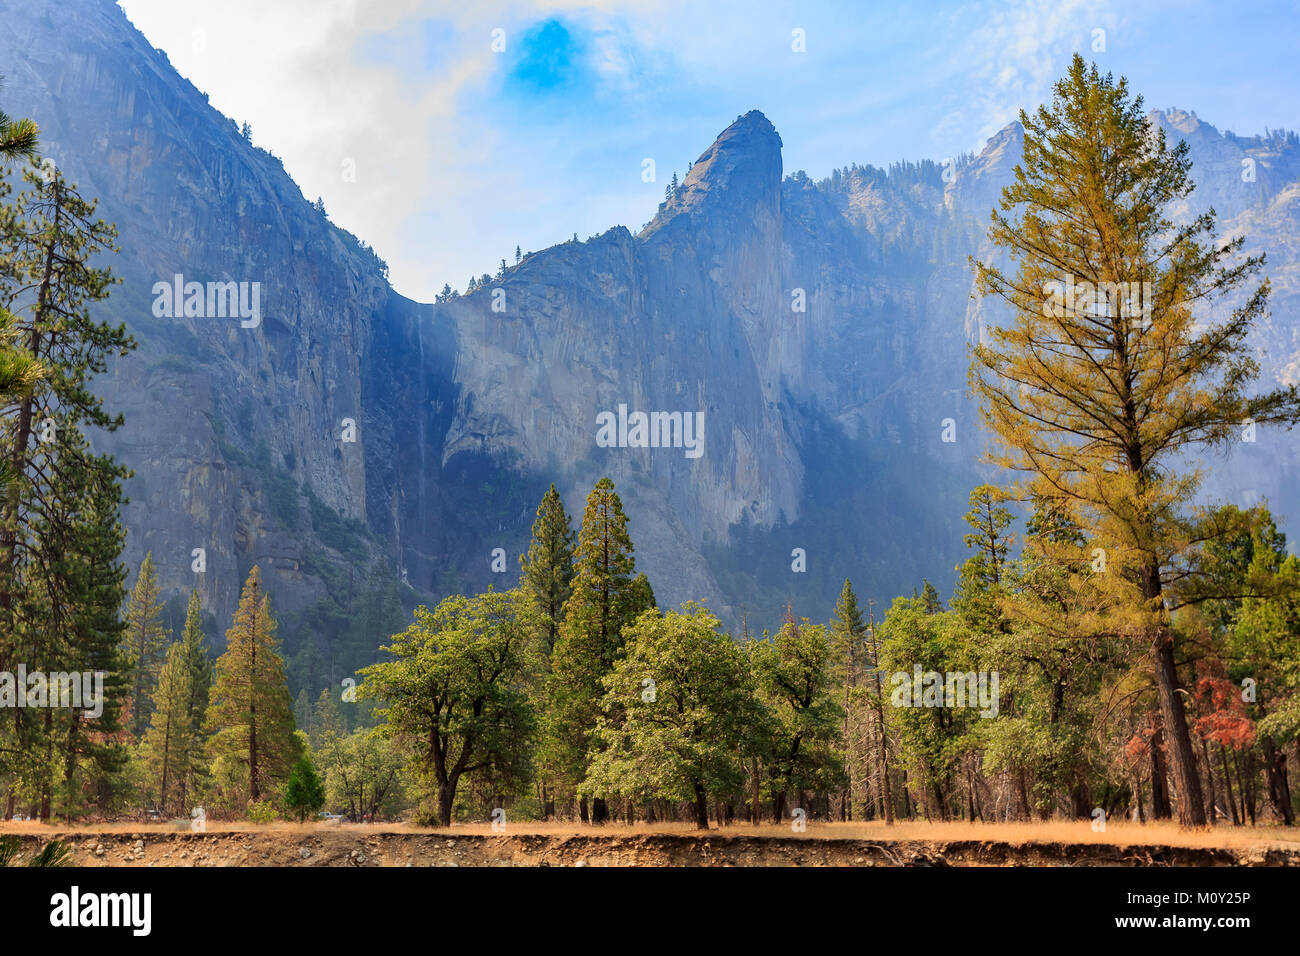 Morning view of the bridalveil fall with trees in Yosemite National Park, California Stock Photo